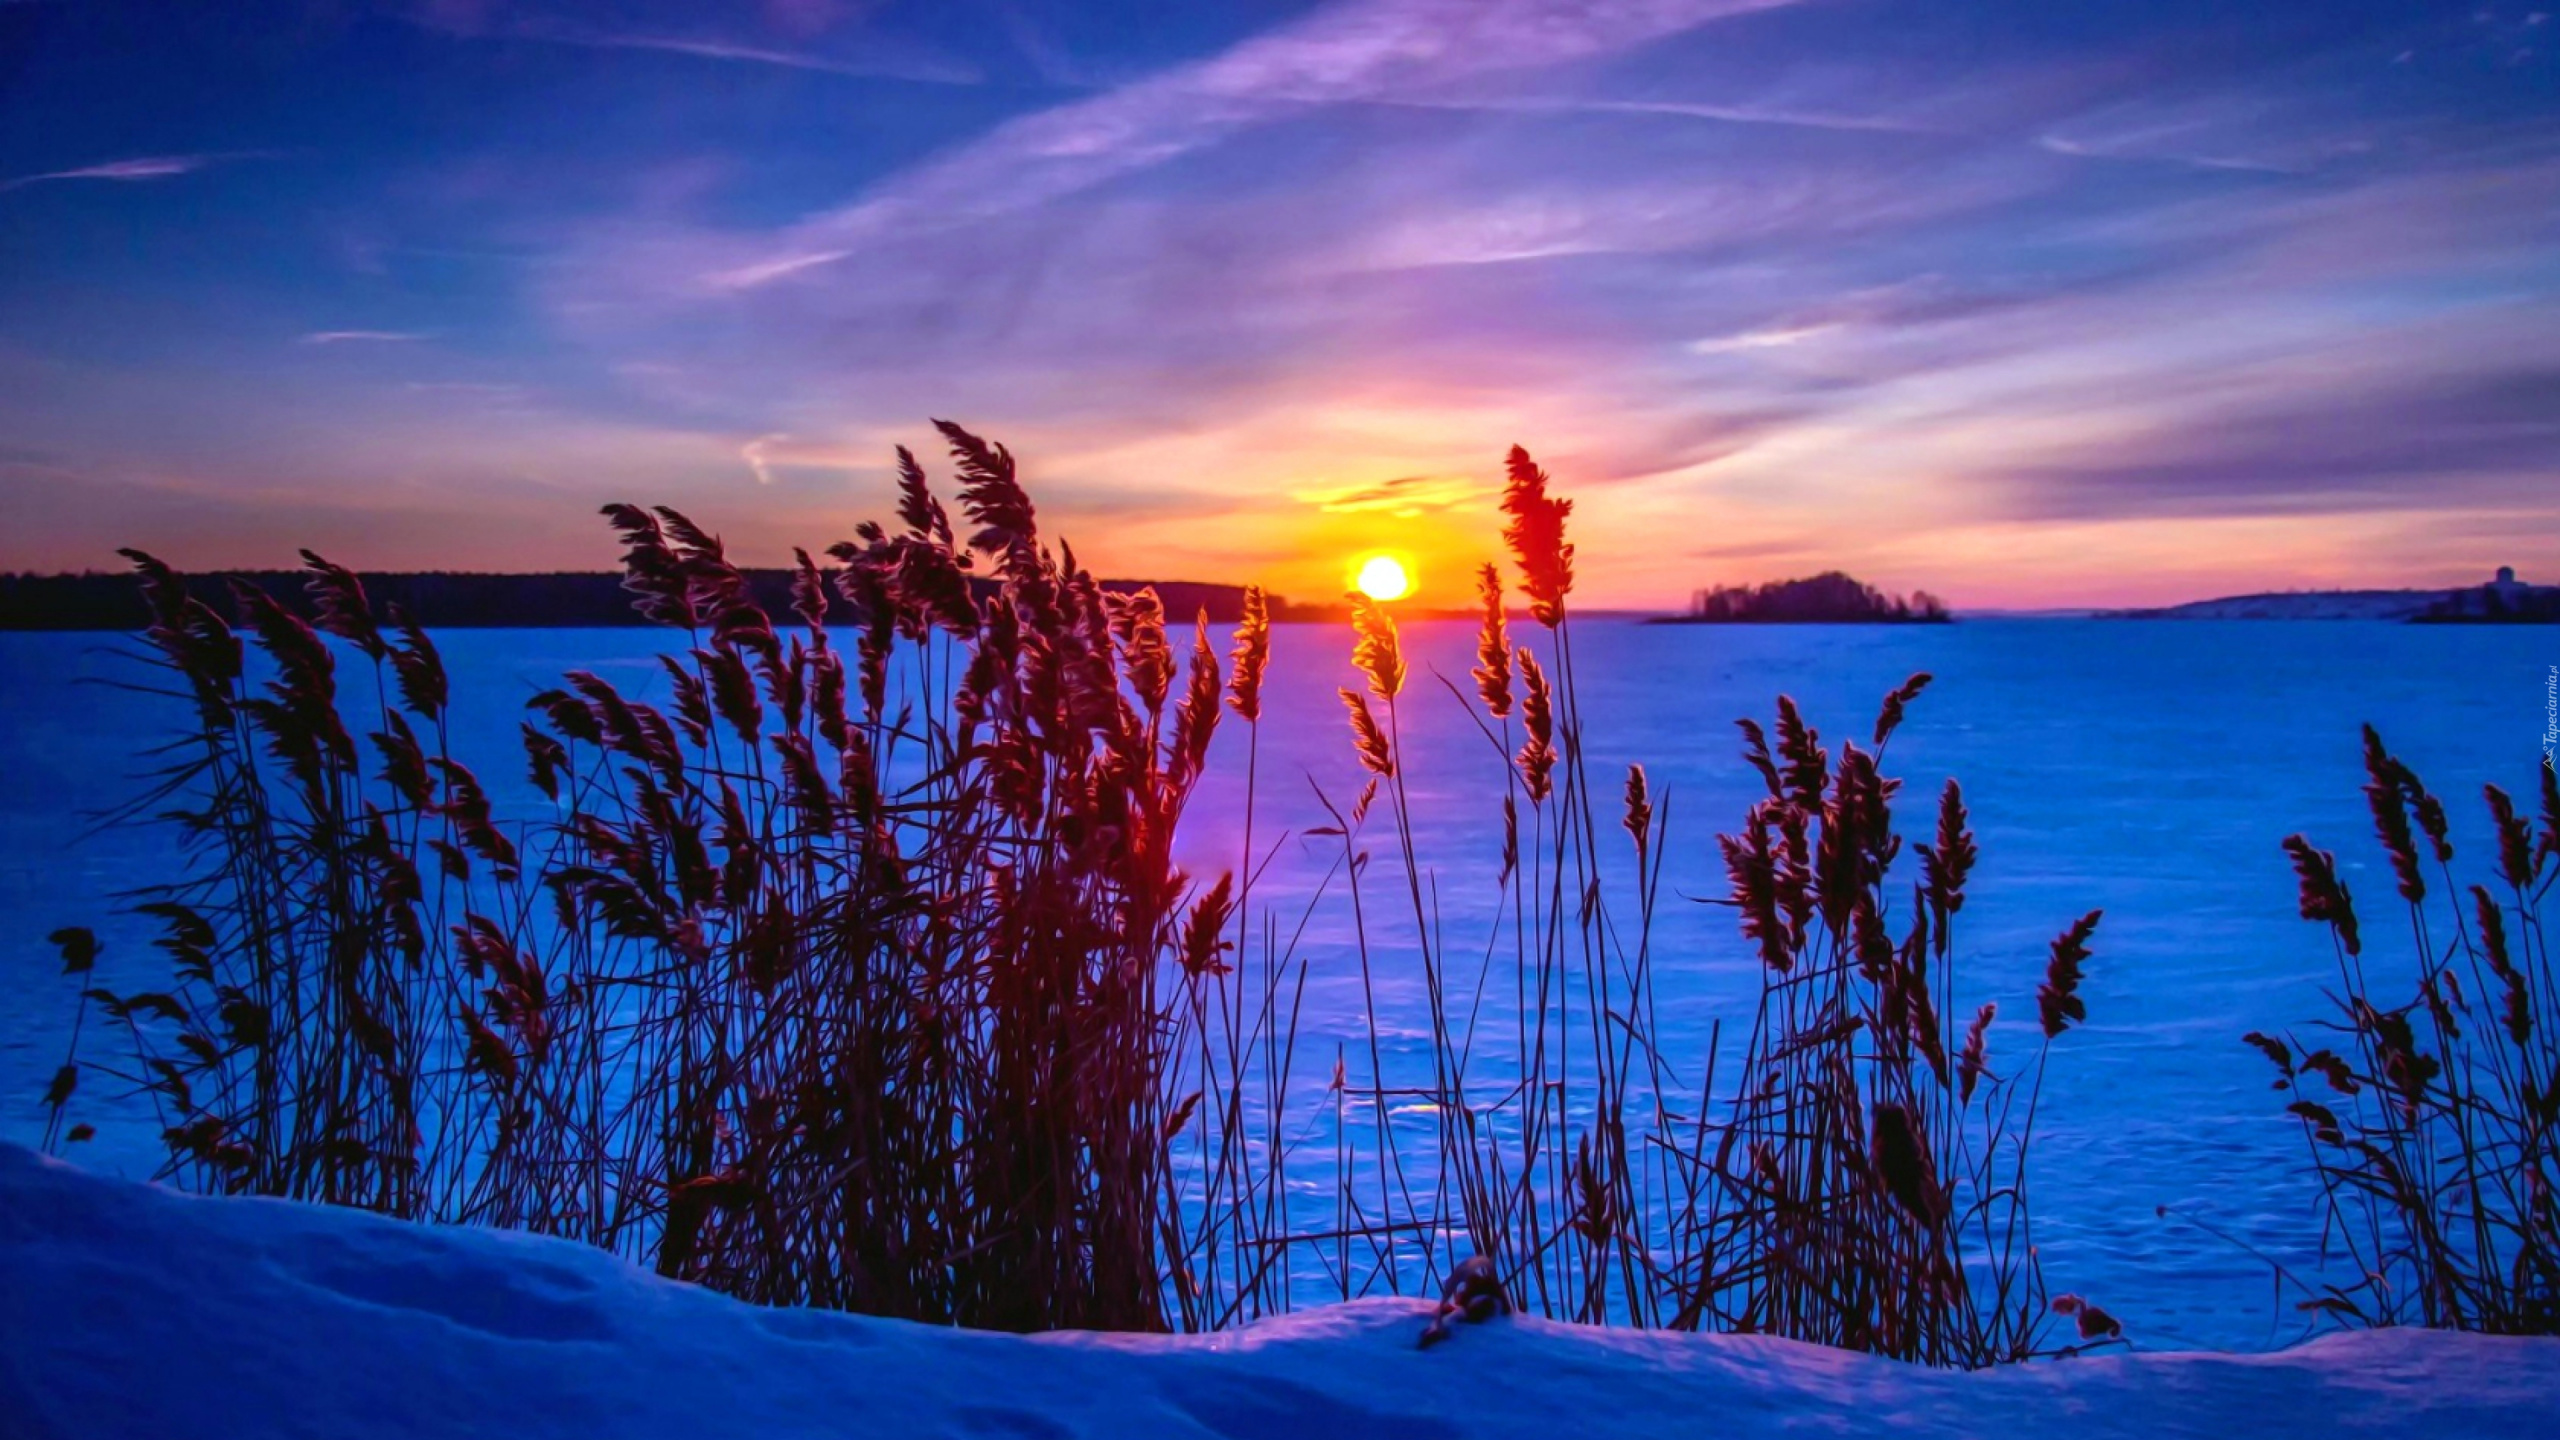 Sunset, Winter, Snow, Nature, Natural Landscape. Wallpaper in 2560x1440 Resolution